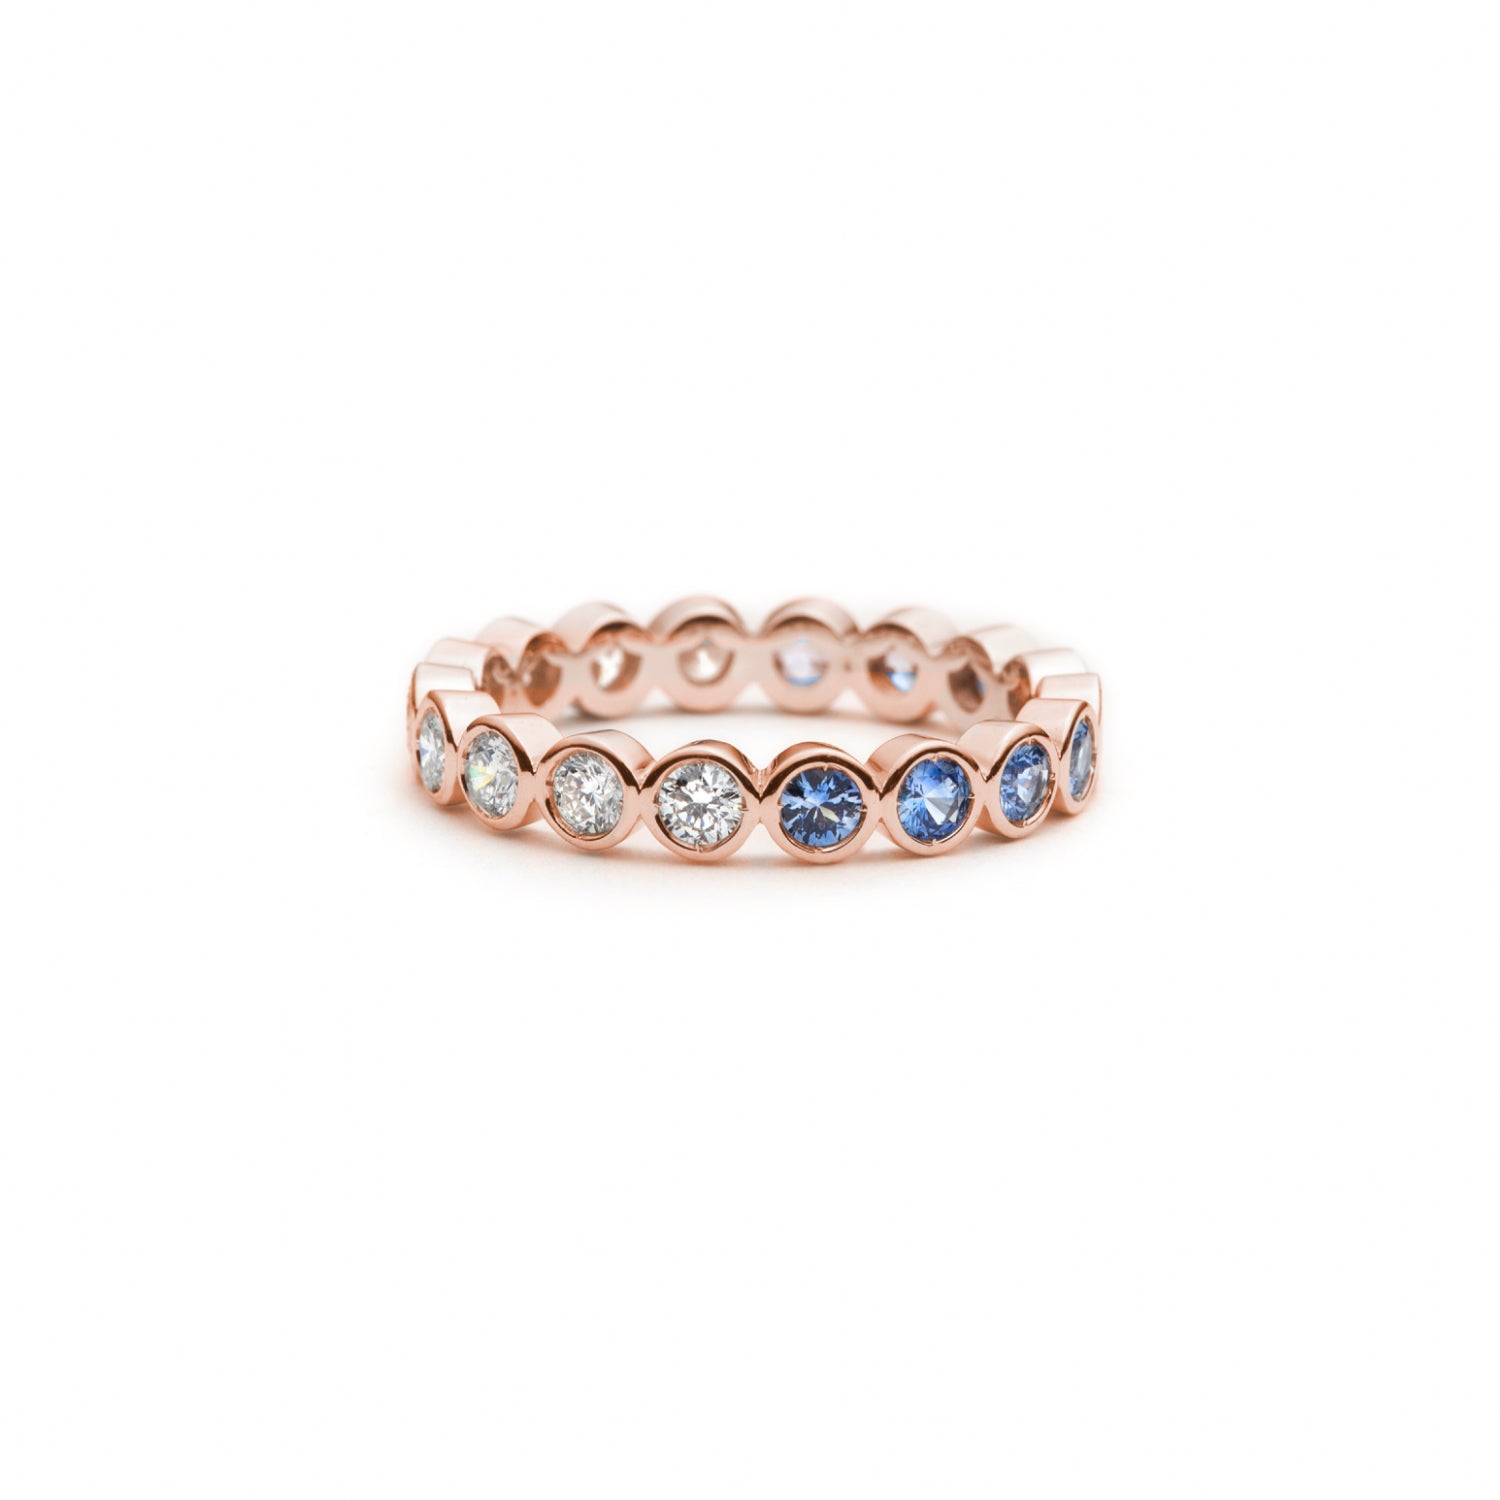 Mermaid Diamond and Sapphire Eternity Ring in Rose Gold